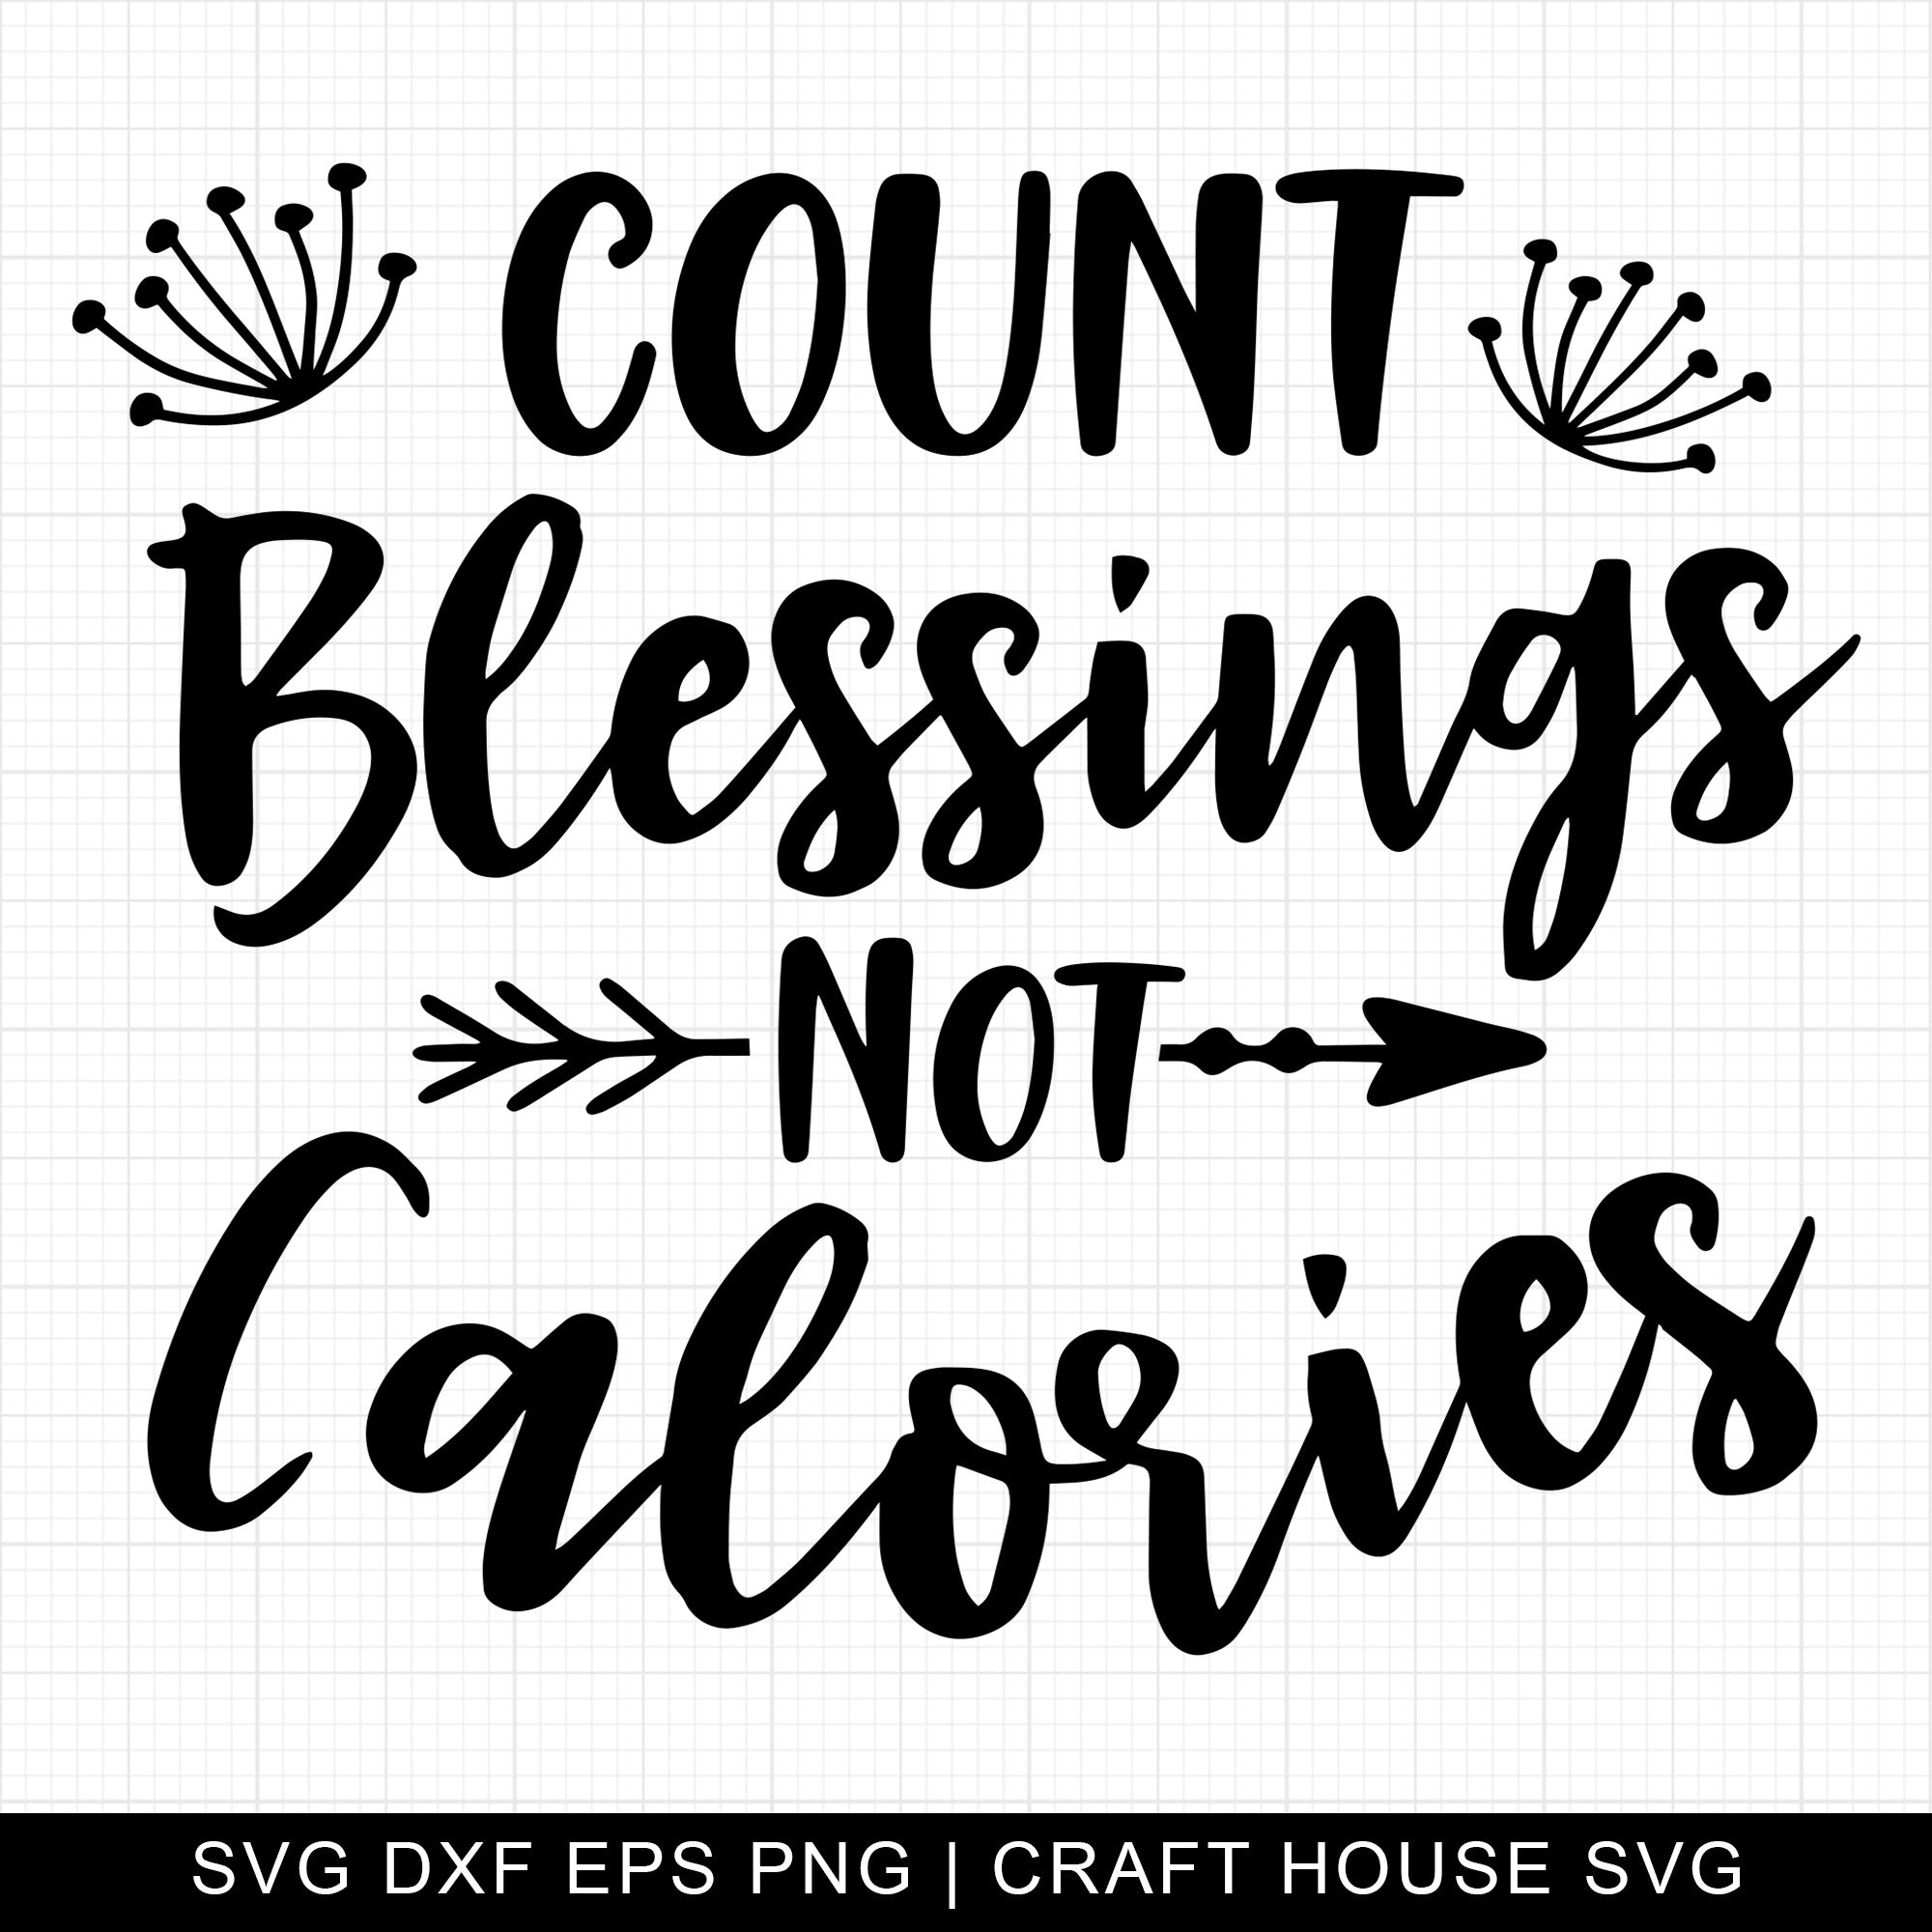 Count blessings not calories SVG | M4F3